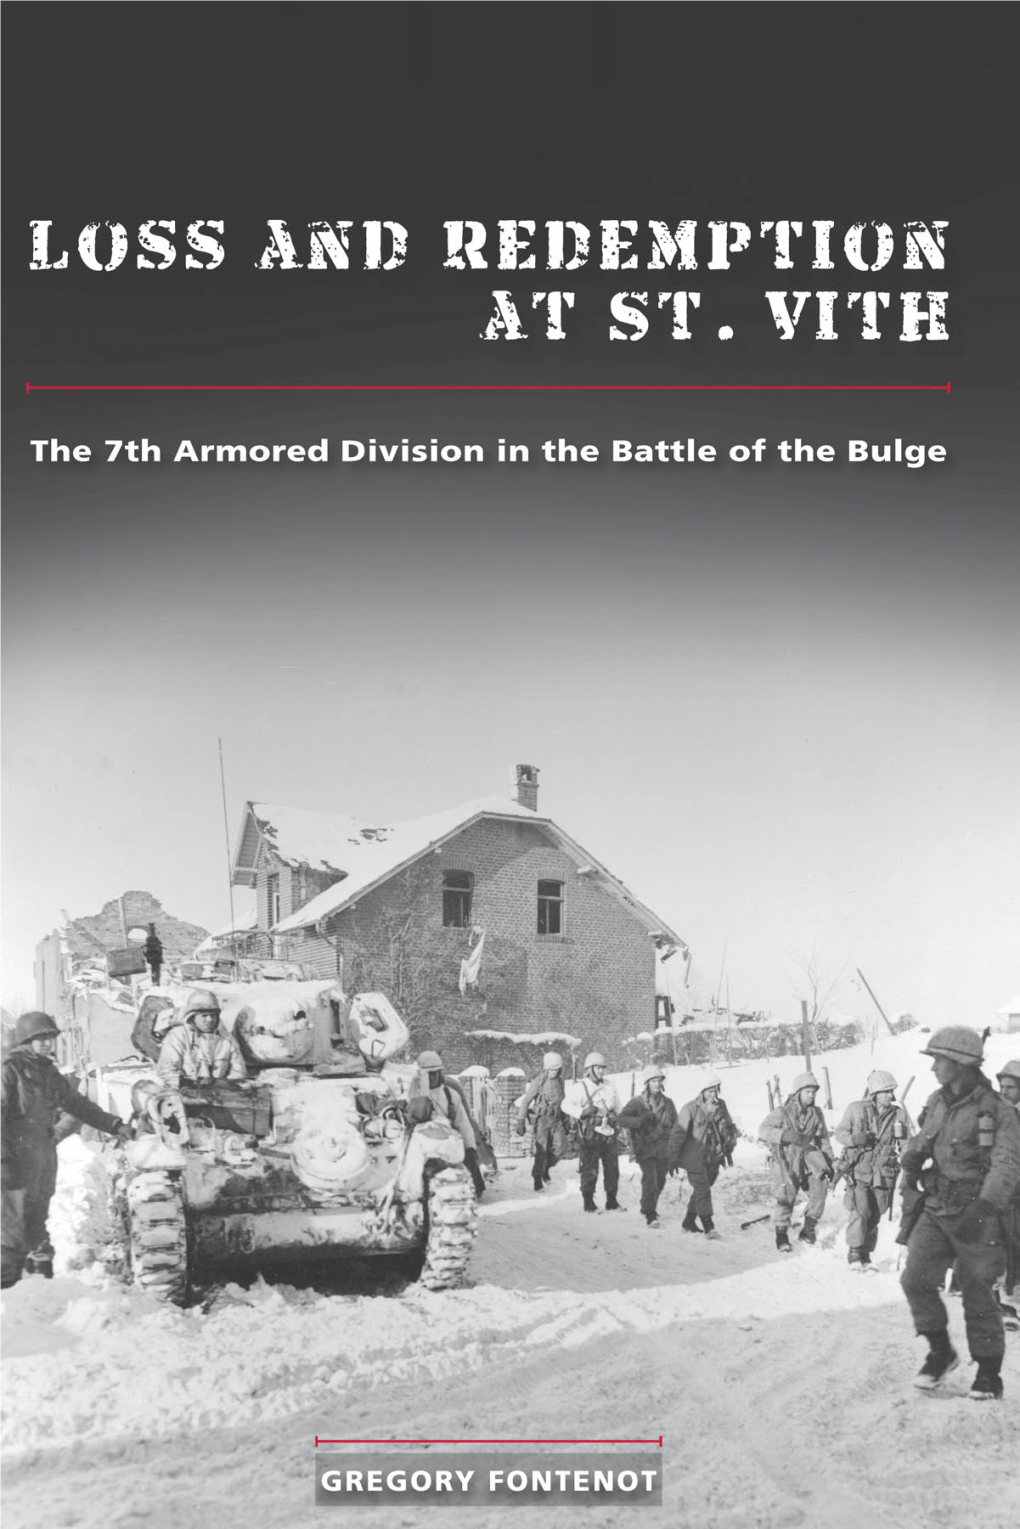 The 7Th Armored Division in the Battle of the Bulge